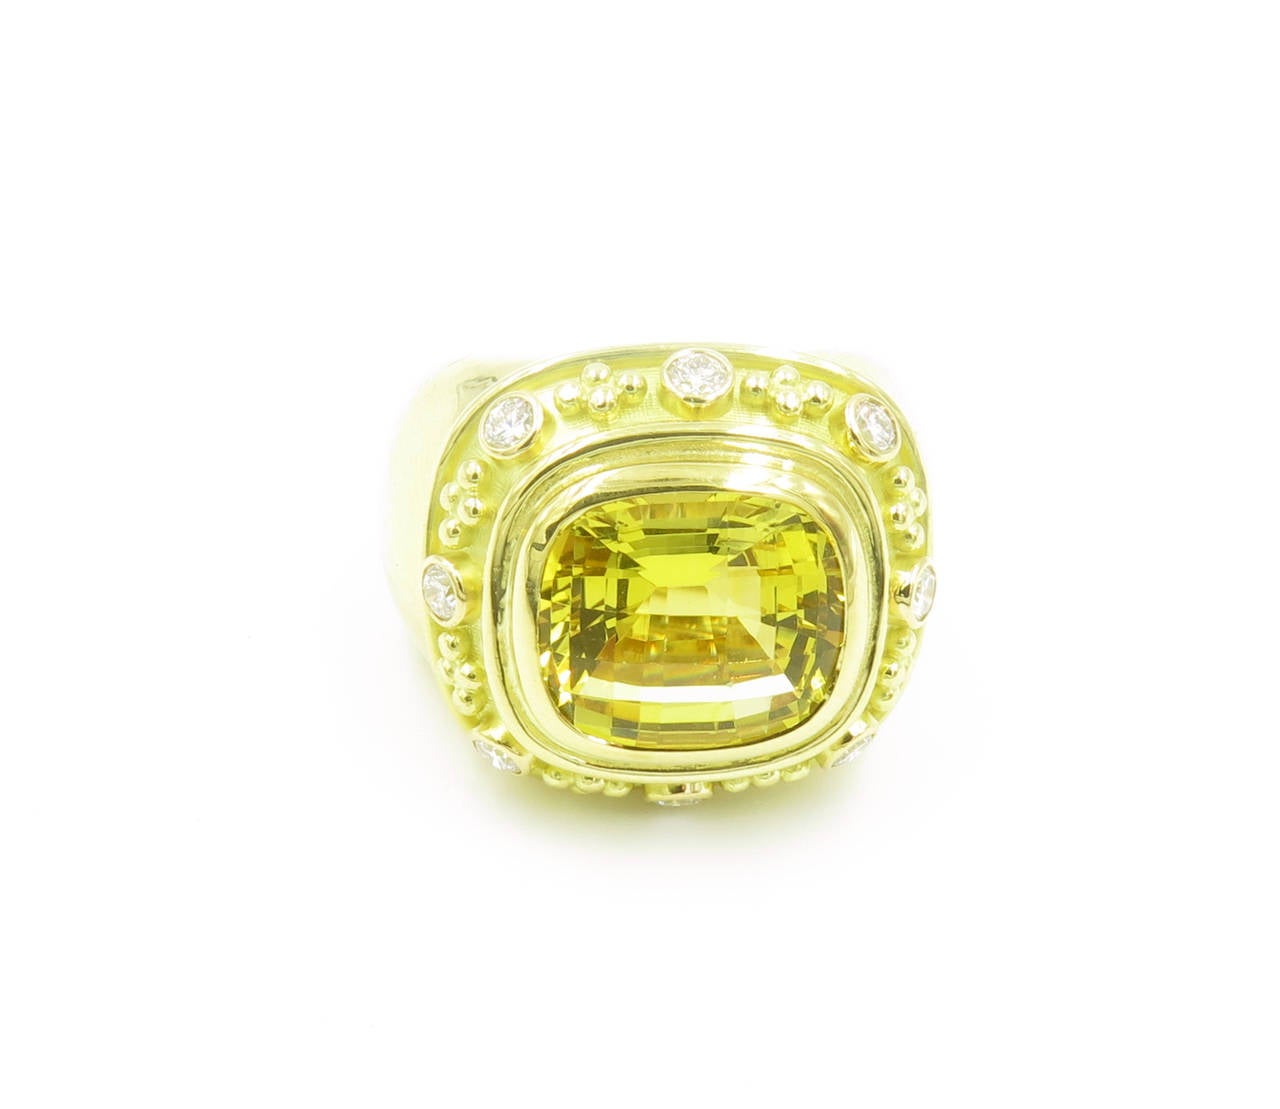 An 18 karat yellow gold, golden beryl and diamond “Charlemagne” ring, Elizabeth Gage, London, 2002.  Hallmarked with Elizabeth Gage maker’s mark and London hallmarks.  The ring is bezel set with a cushion shape checkerboard cut golden beryl, and 8